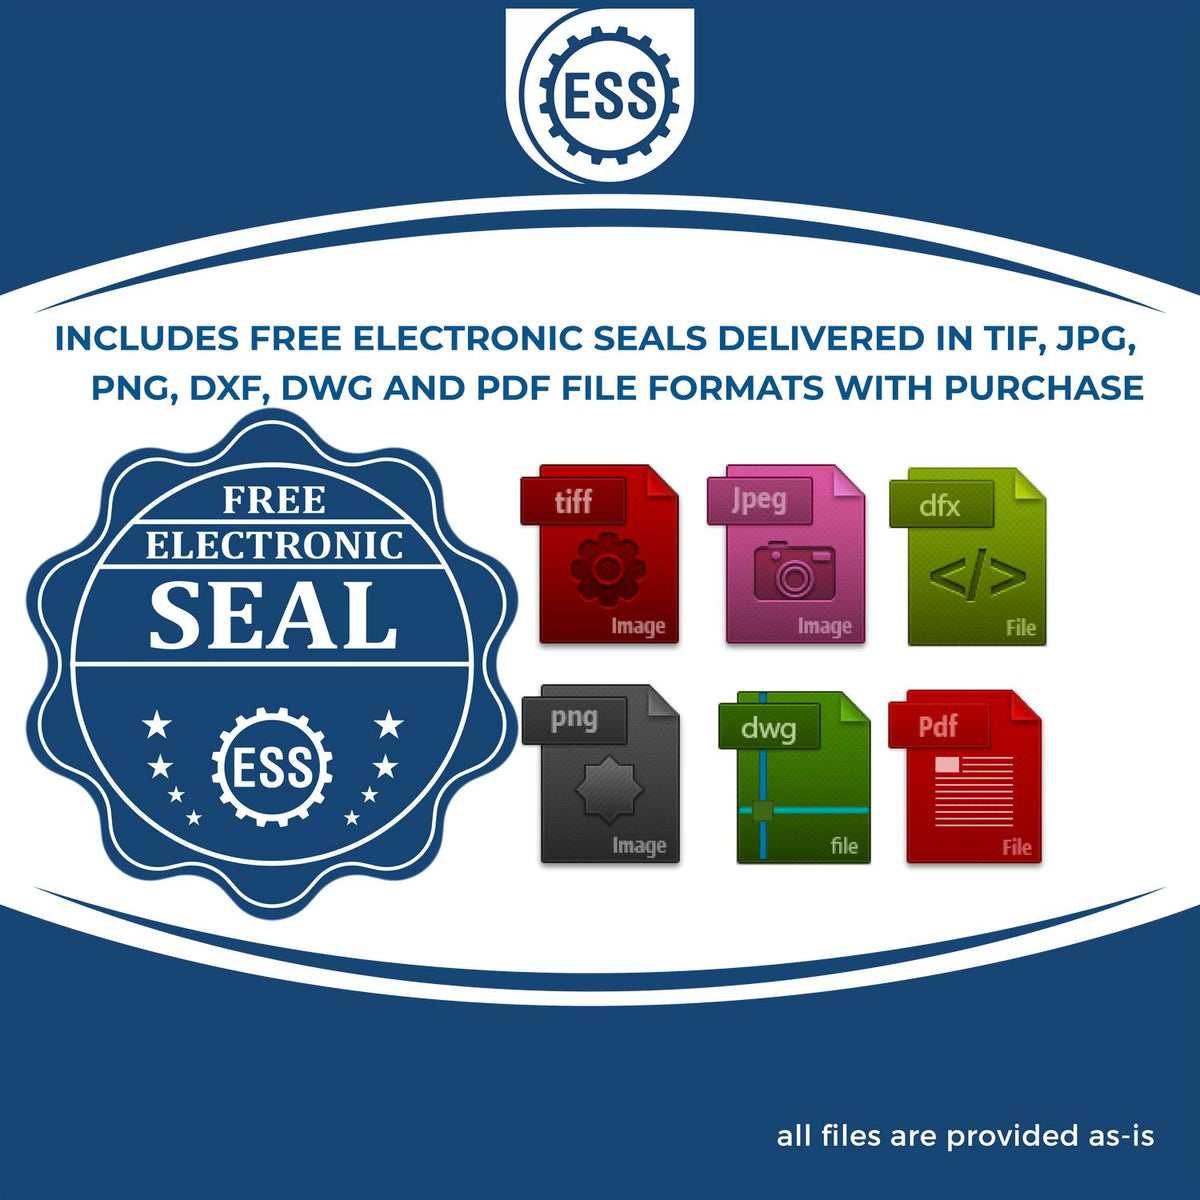 An infographic for the free electronic seal for the Slim Pre-Inked State Seal Notary Stamp for Louisiana illustrating the different file type icons such as DXF, DWG, TIF, JPG and PNG.